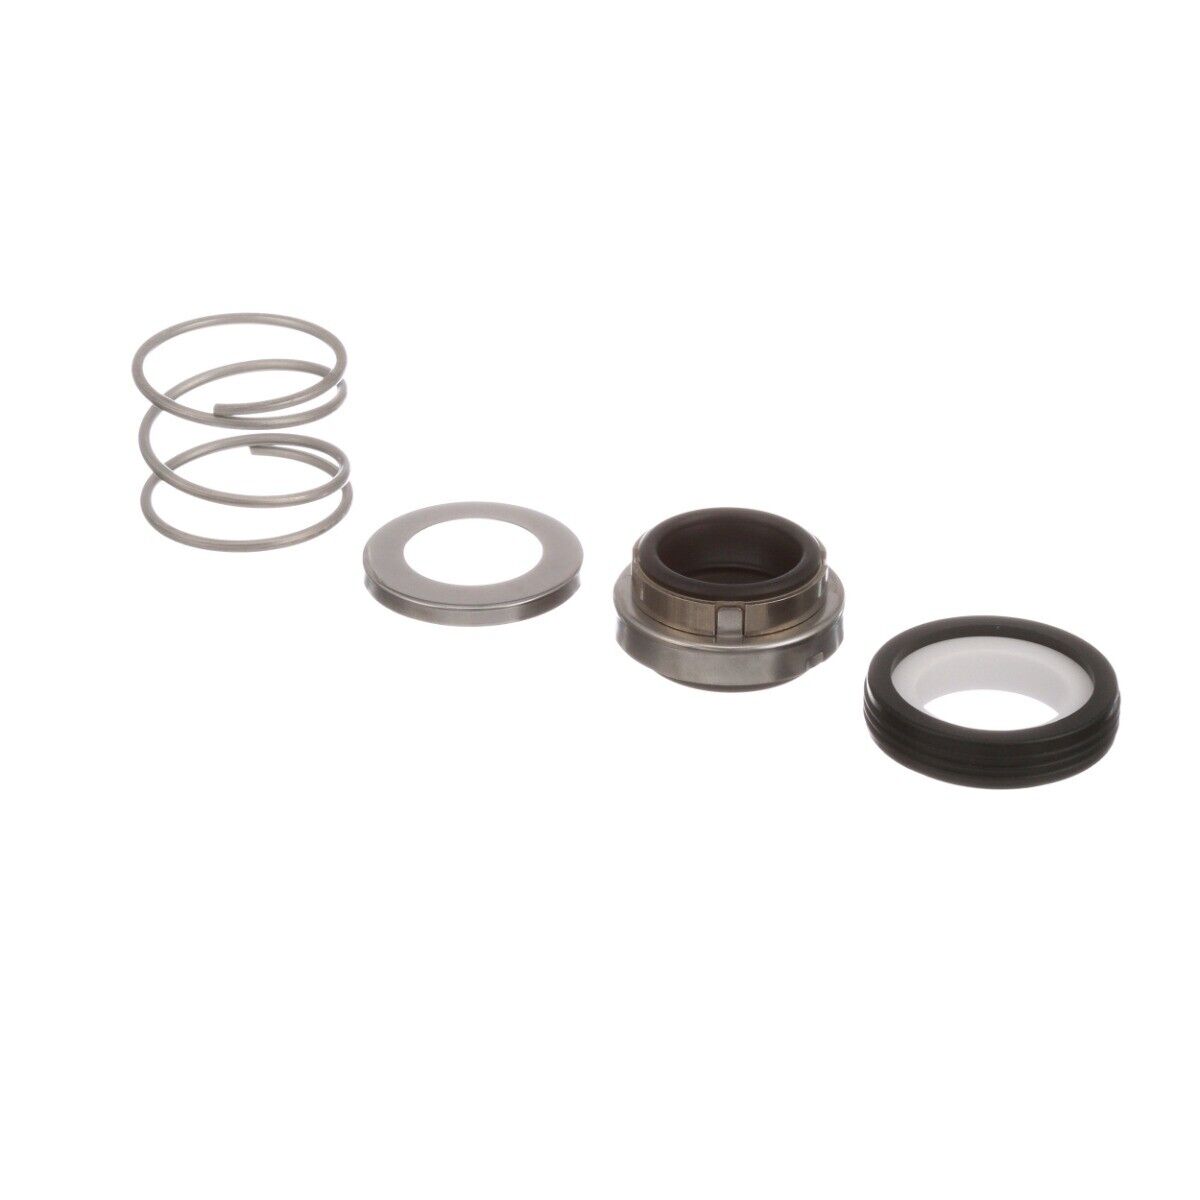 Pump Seal for Stero Dishwasher - Part# P571697